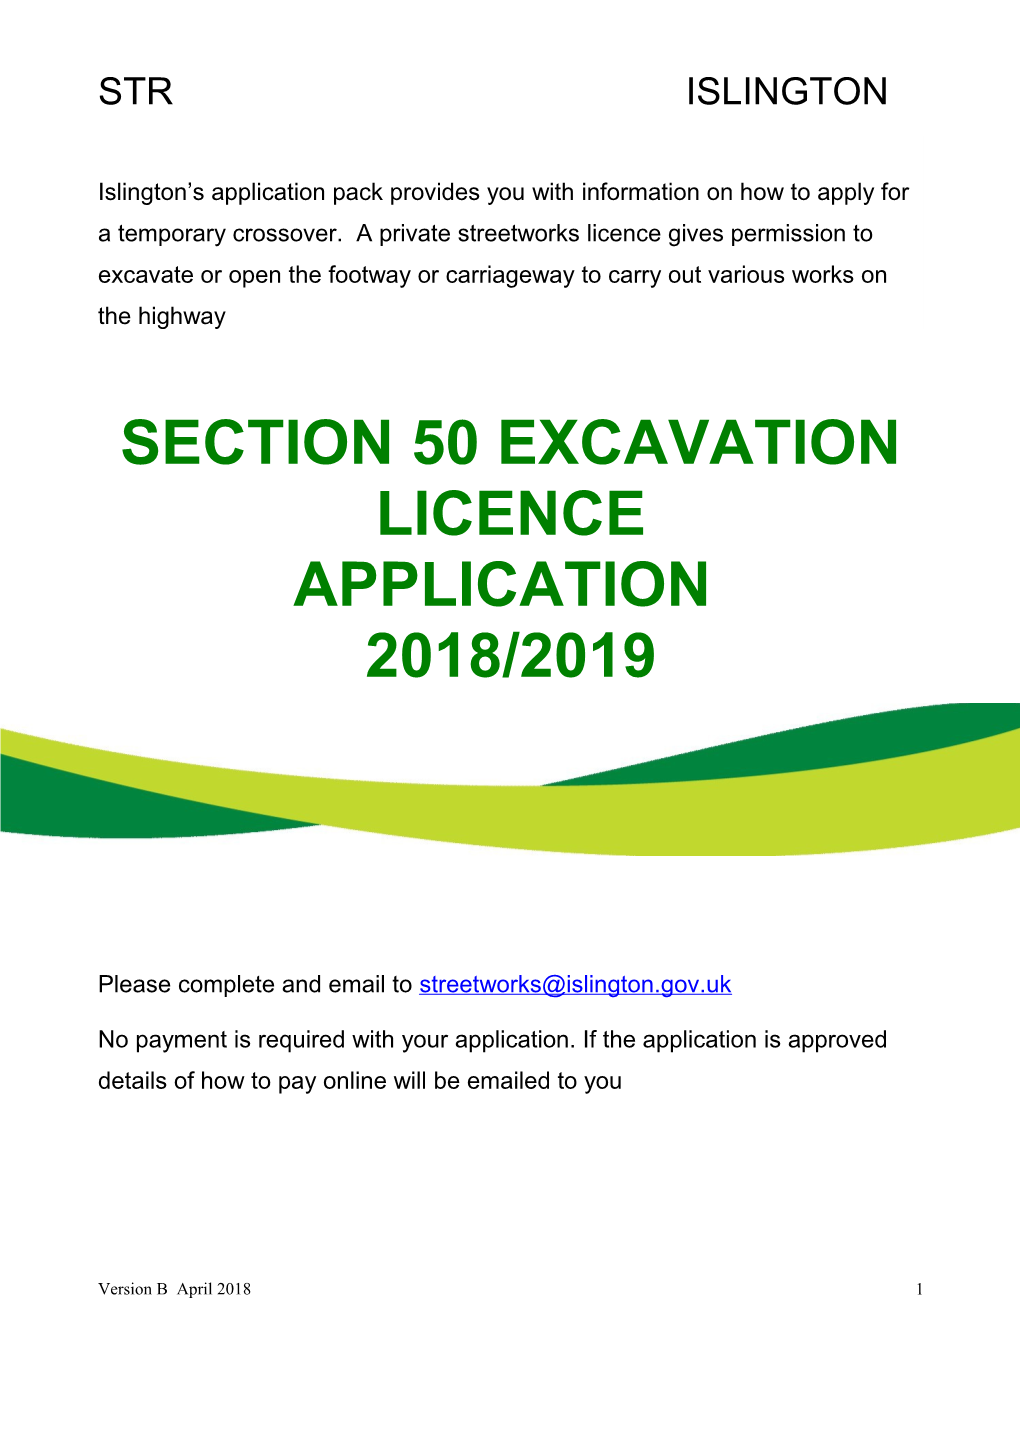 Section 50 Excavation Licence Ver B 2018